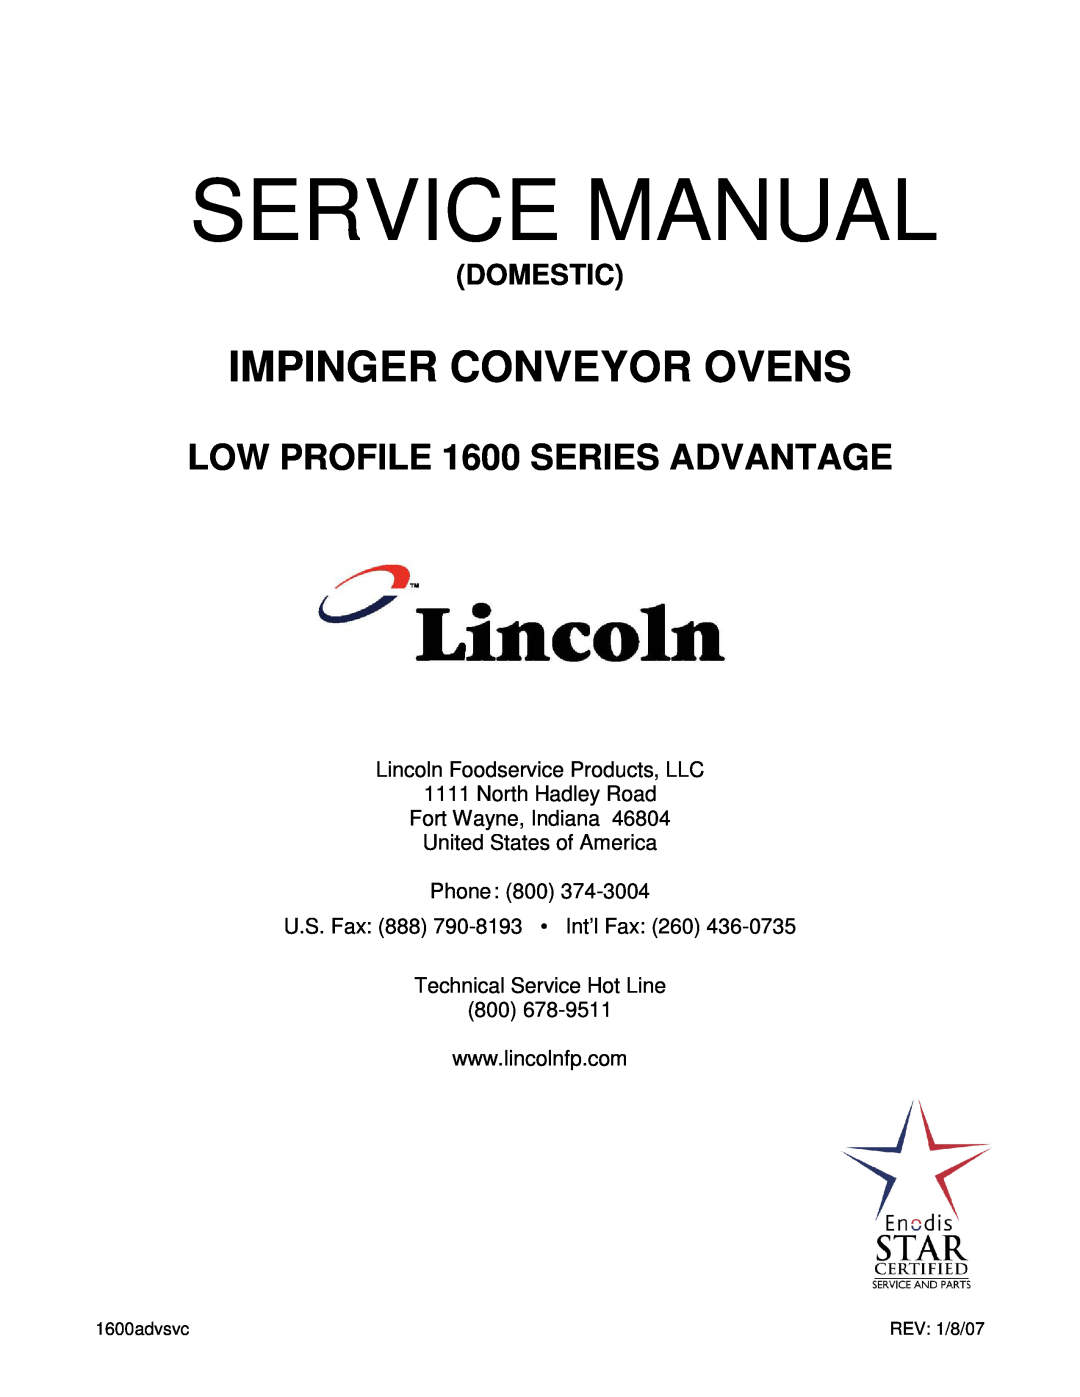 Lincoln 1600 service manual Lincoln Foodservice Products, LLC, North Hadley Road Fort Wayne, Indiana, Domestic 